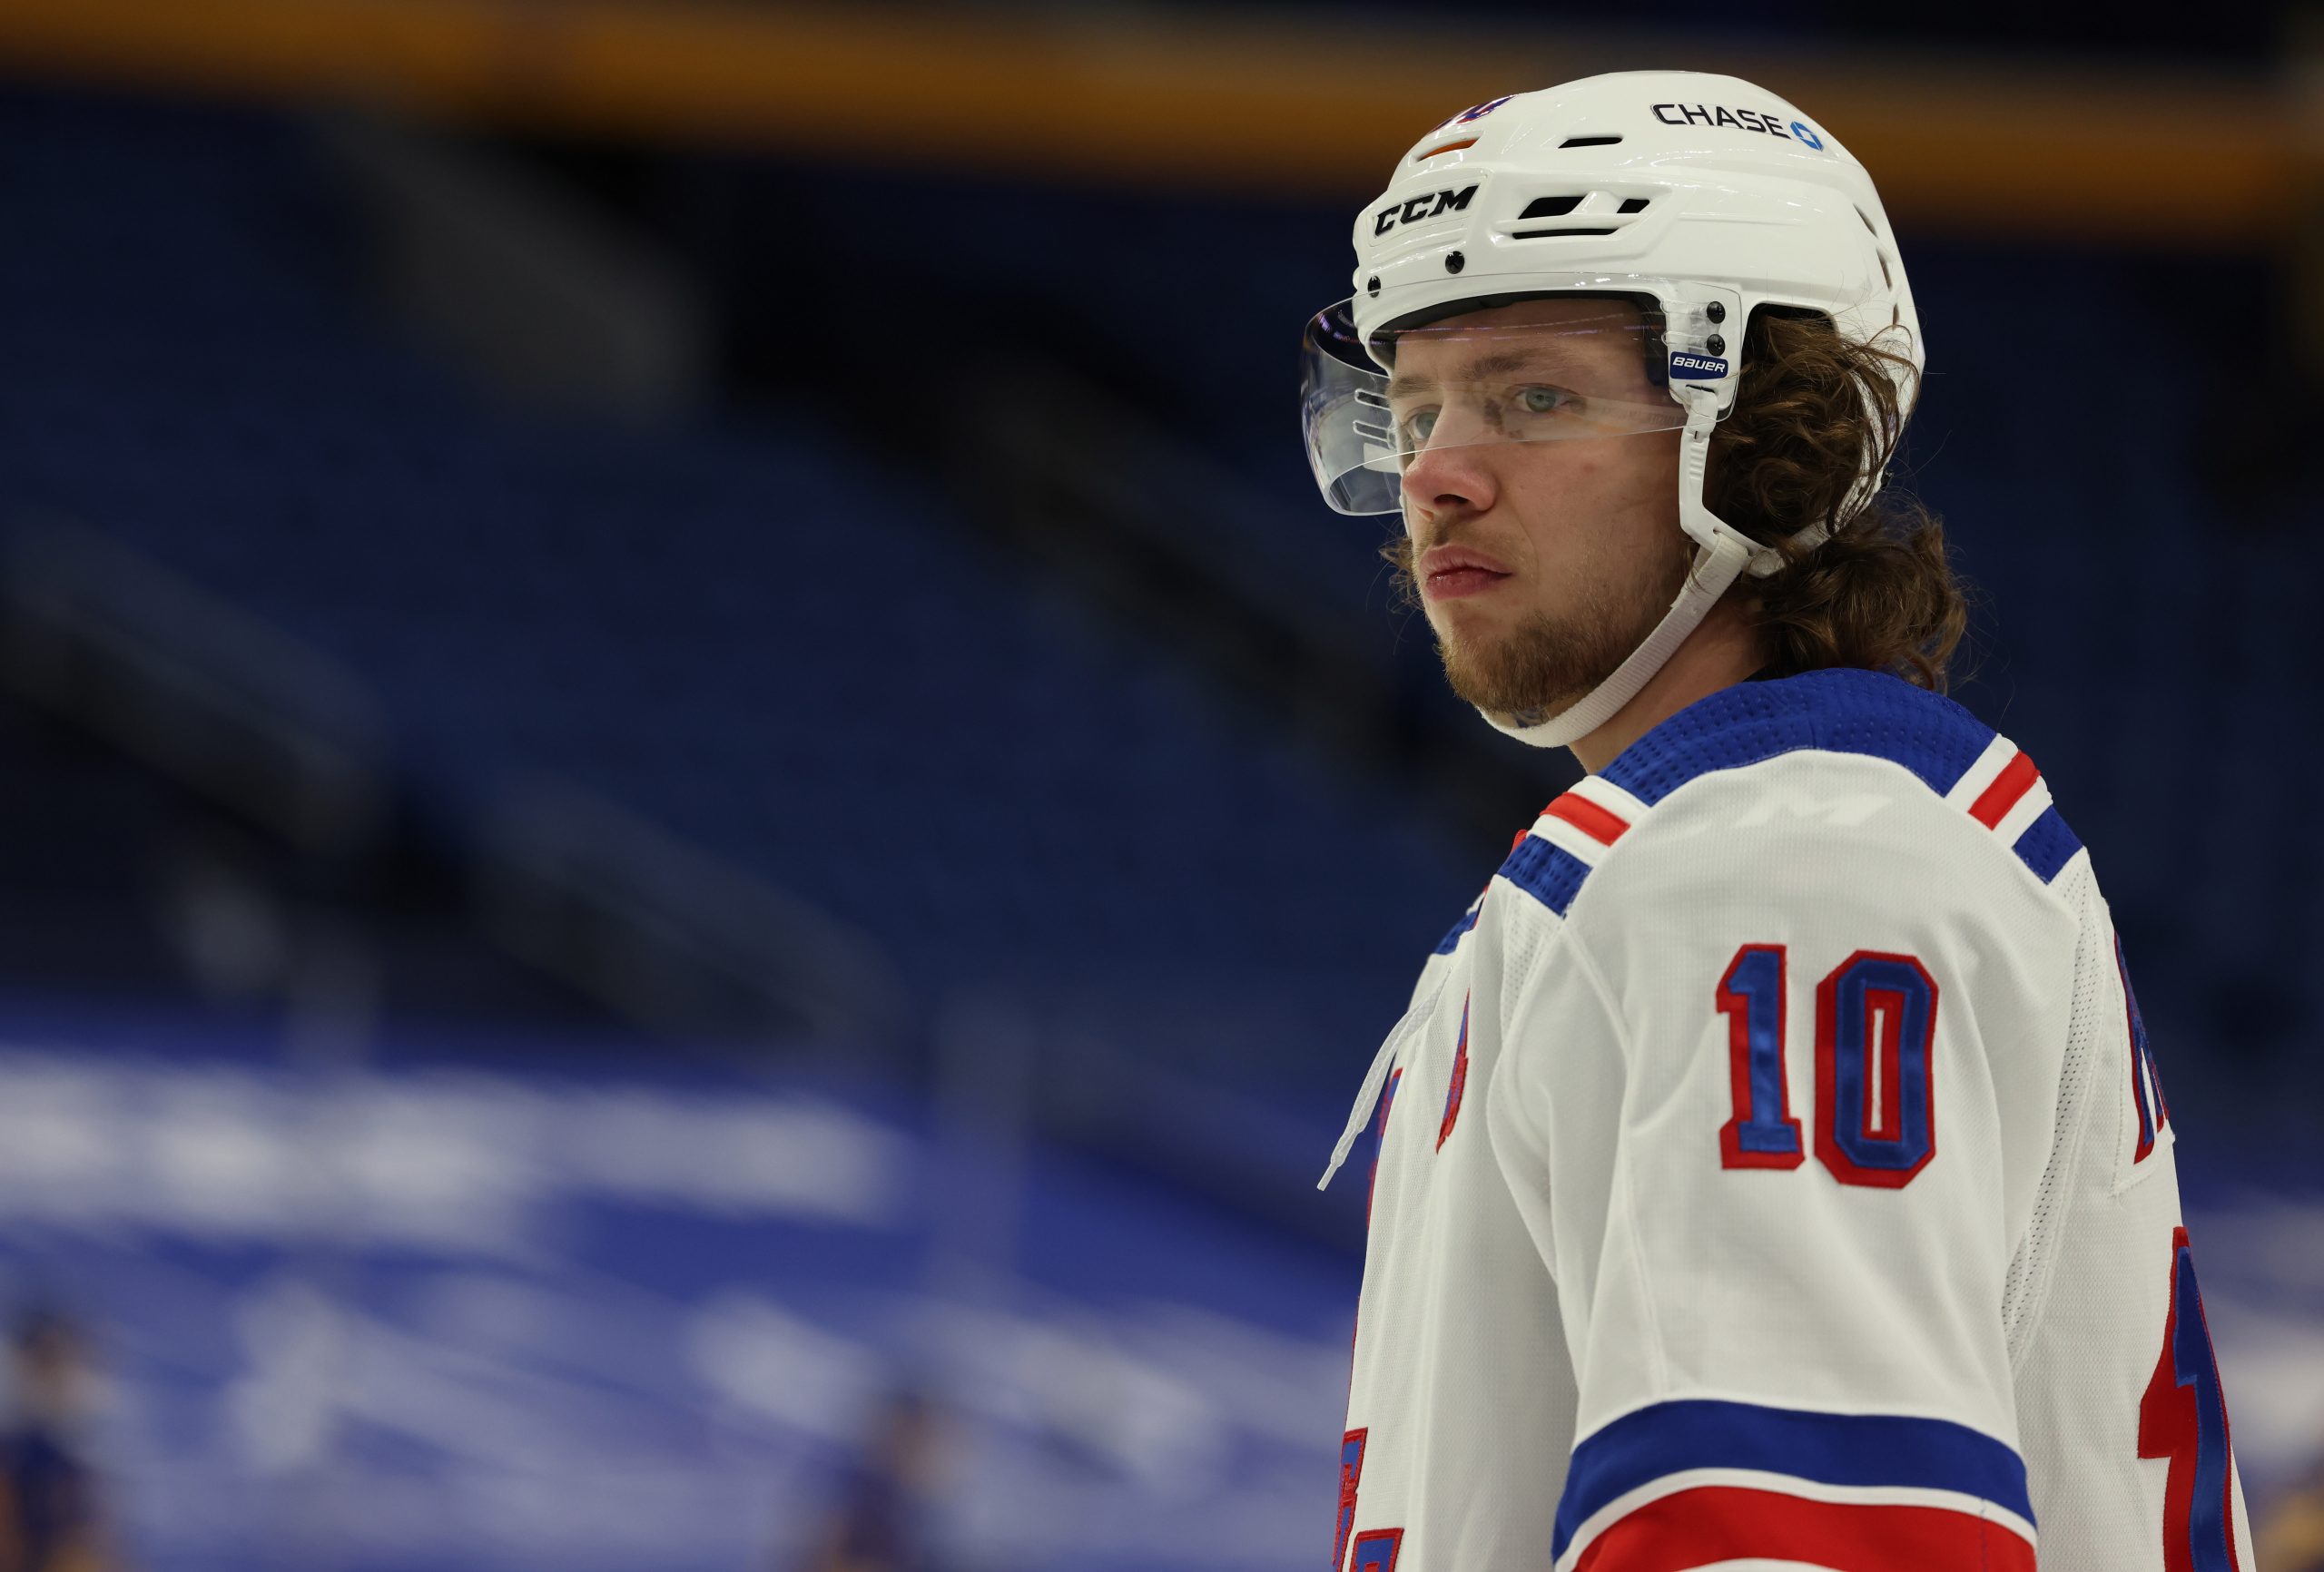 Apr 1, 2021; Buffalo, New York, USA; New York Rangers left wing Artemi Panarin (10) on the ice for warmups before a game against the Buffalo Sabres at KeyBank Center.